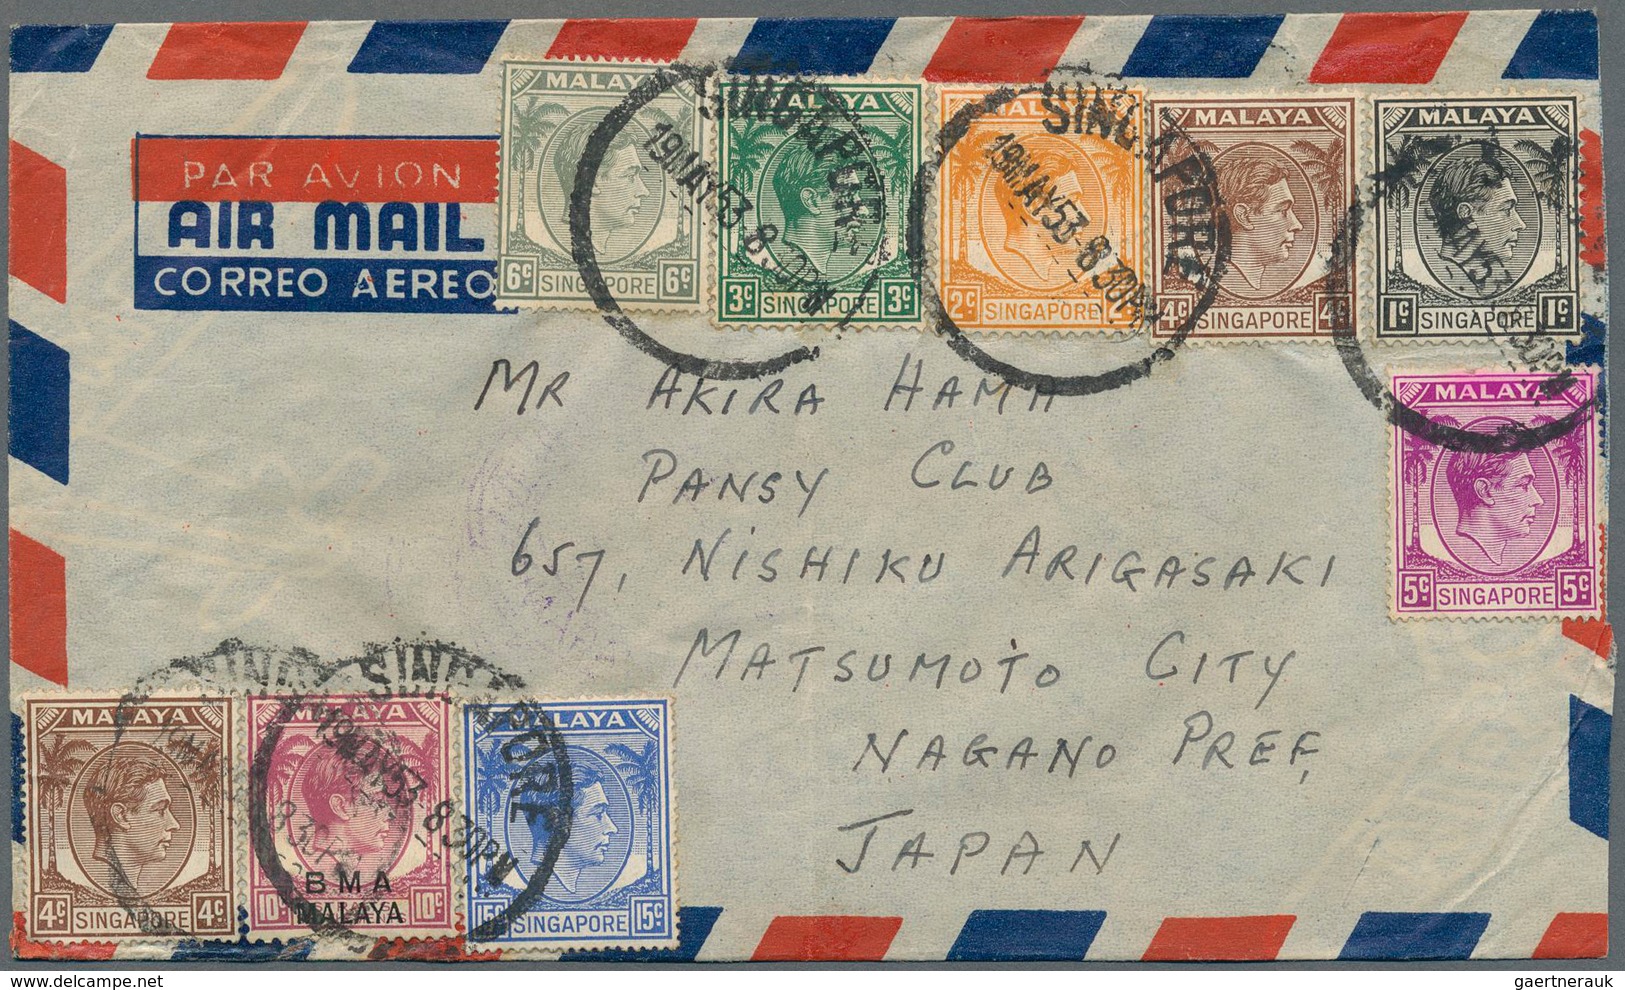 Malaiische Staaten: 1950's: Correspondence of about 120 covers from various P.O.'s of various Malays